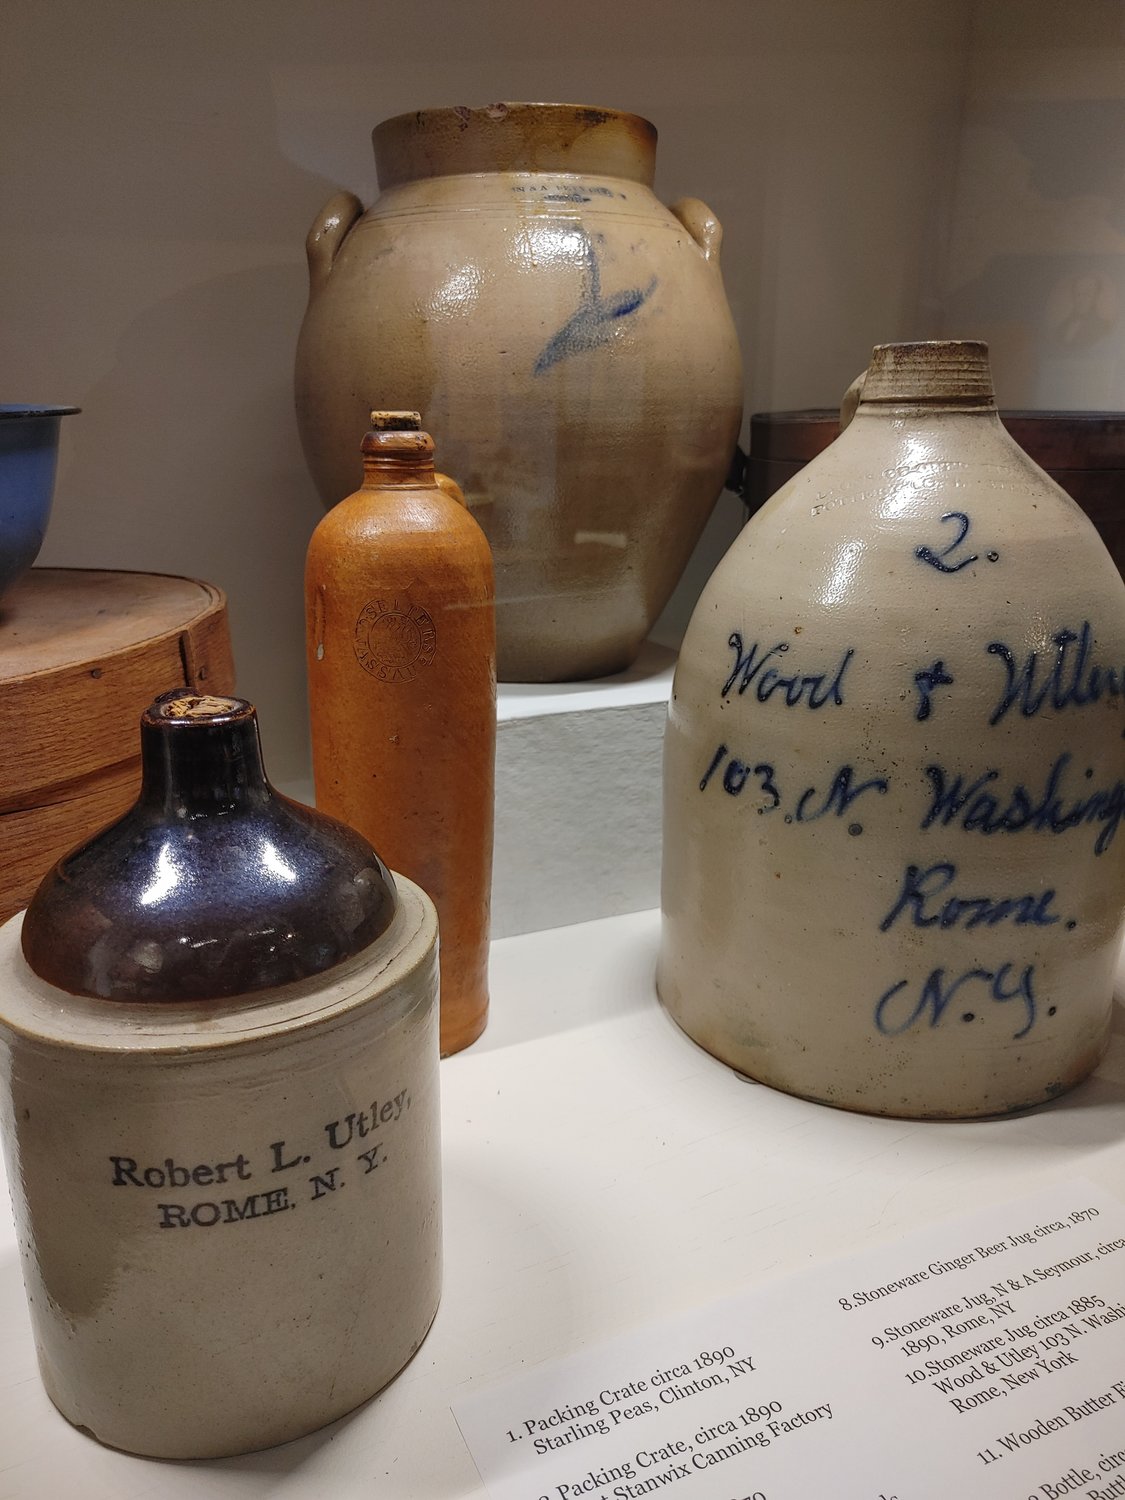 ON DISPLAY — Pottery on display at the Rome Historical Society, including one by Robert L. Utley, at left.